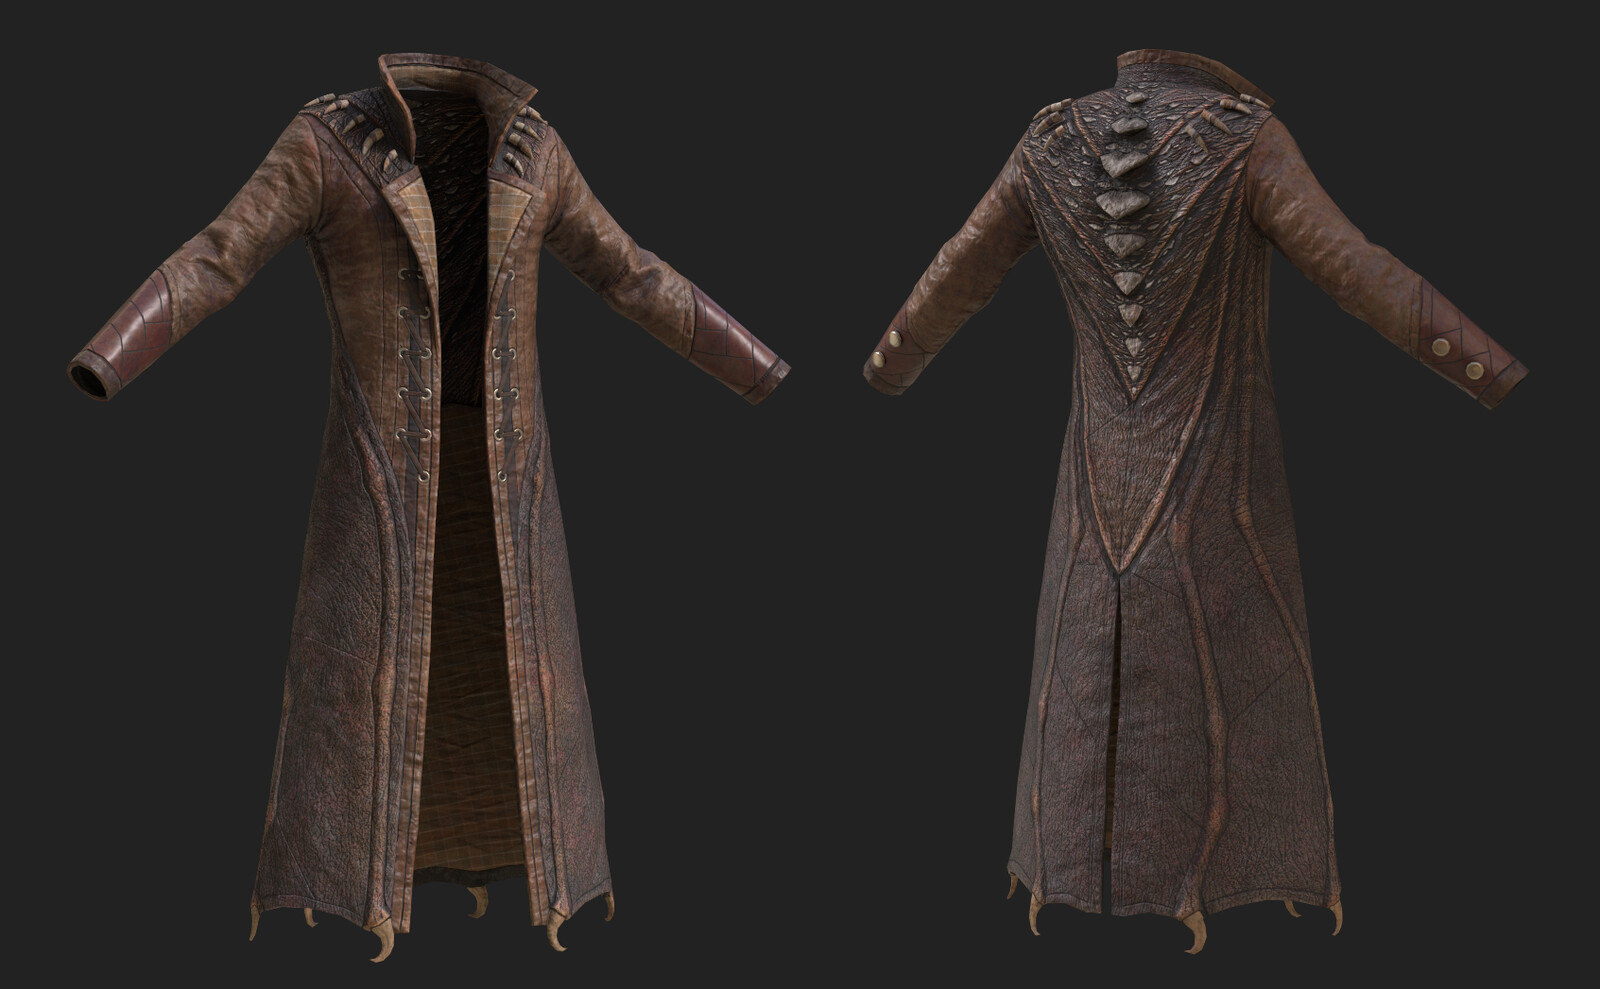 It was a blast making this dragon scale robe. Concept by Nasan Hardcastle. 